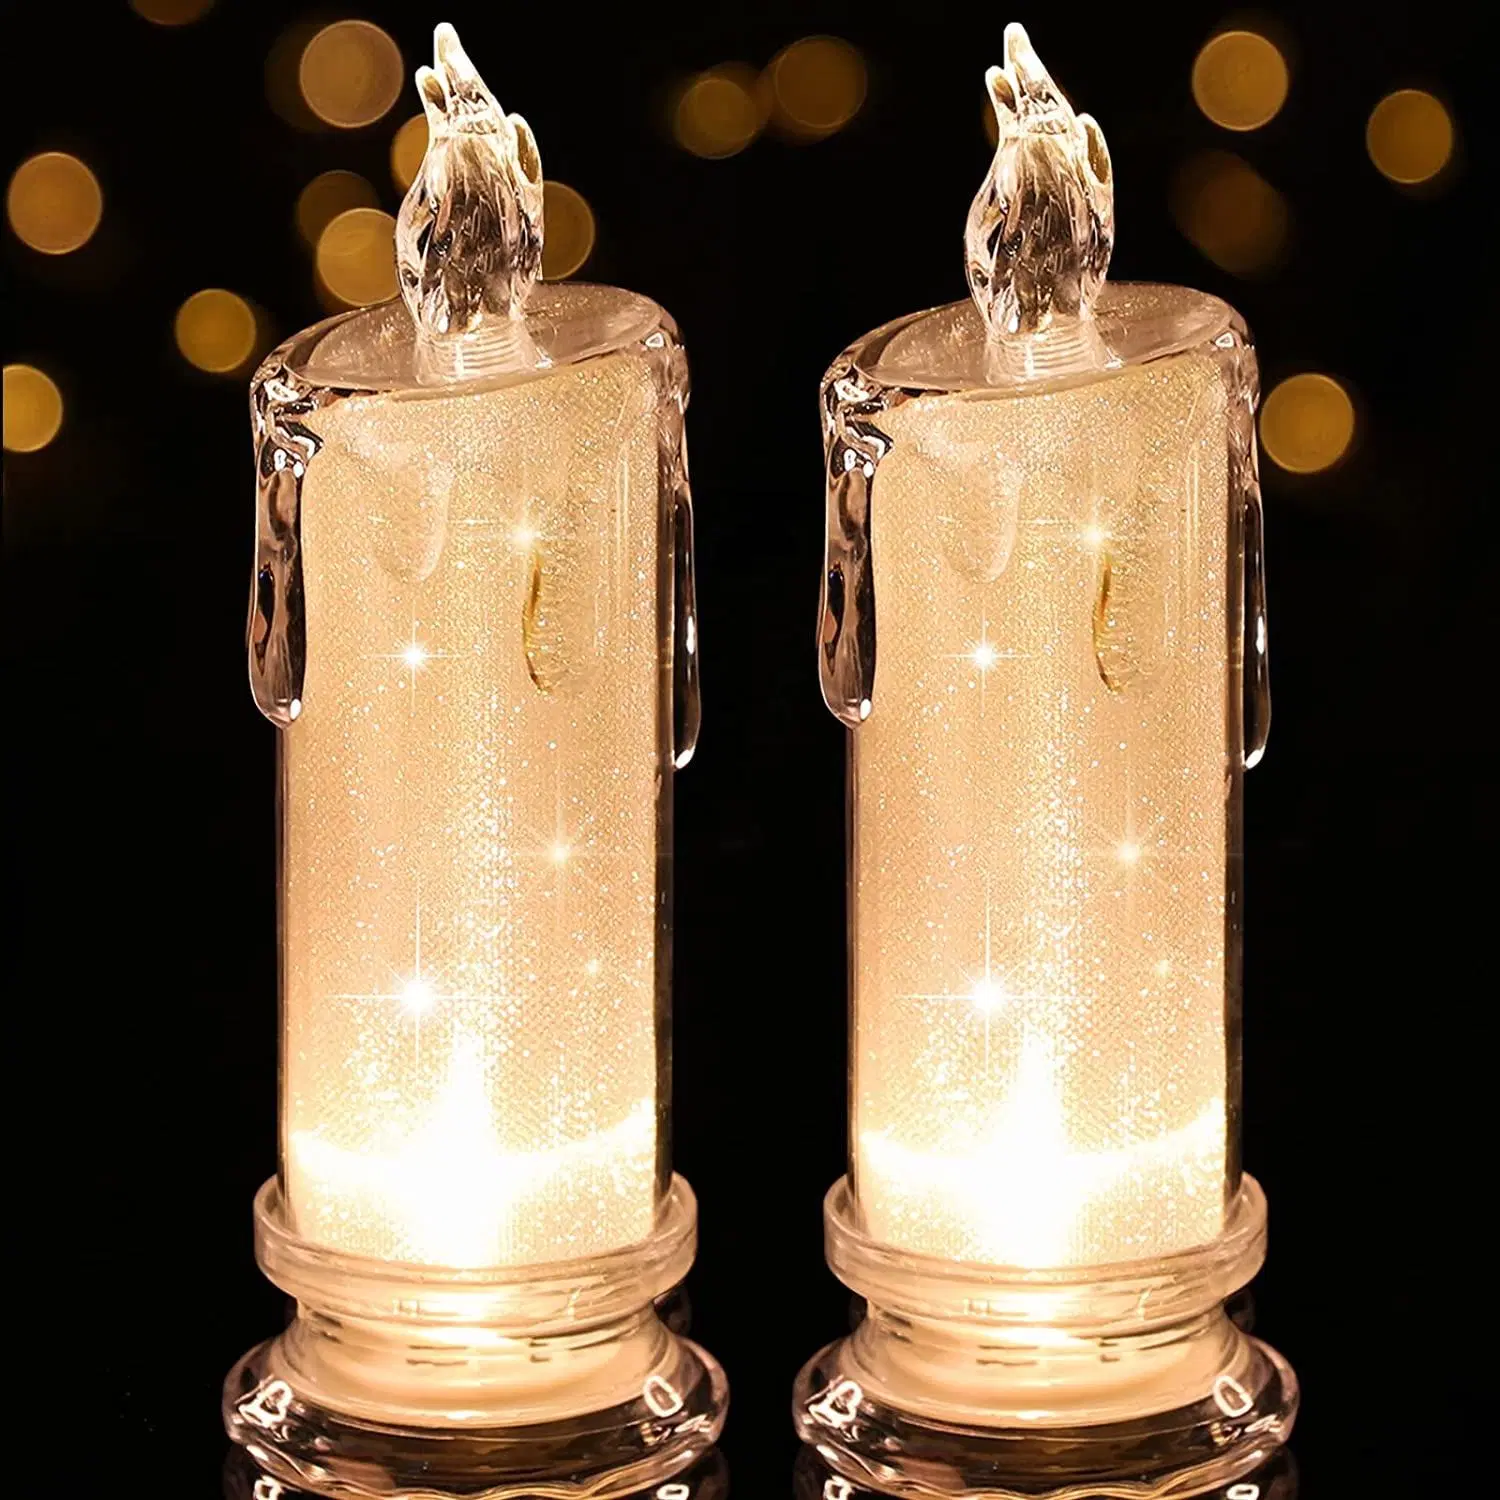 LED Flameless Candles Flickering LED Pillar Candles Battery Operated Candles for Party Wedding House Decorations